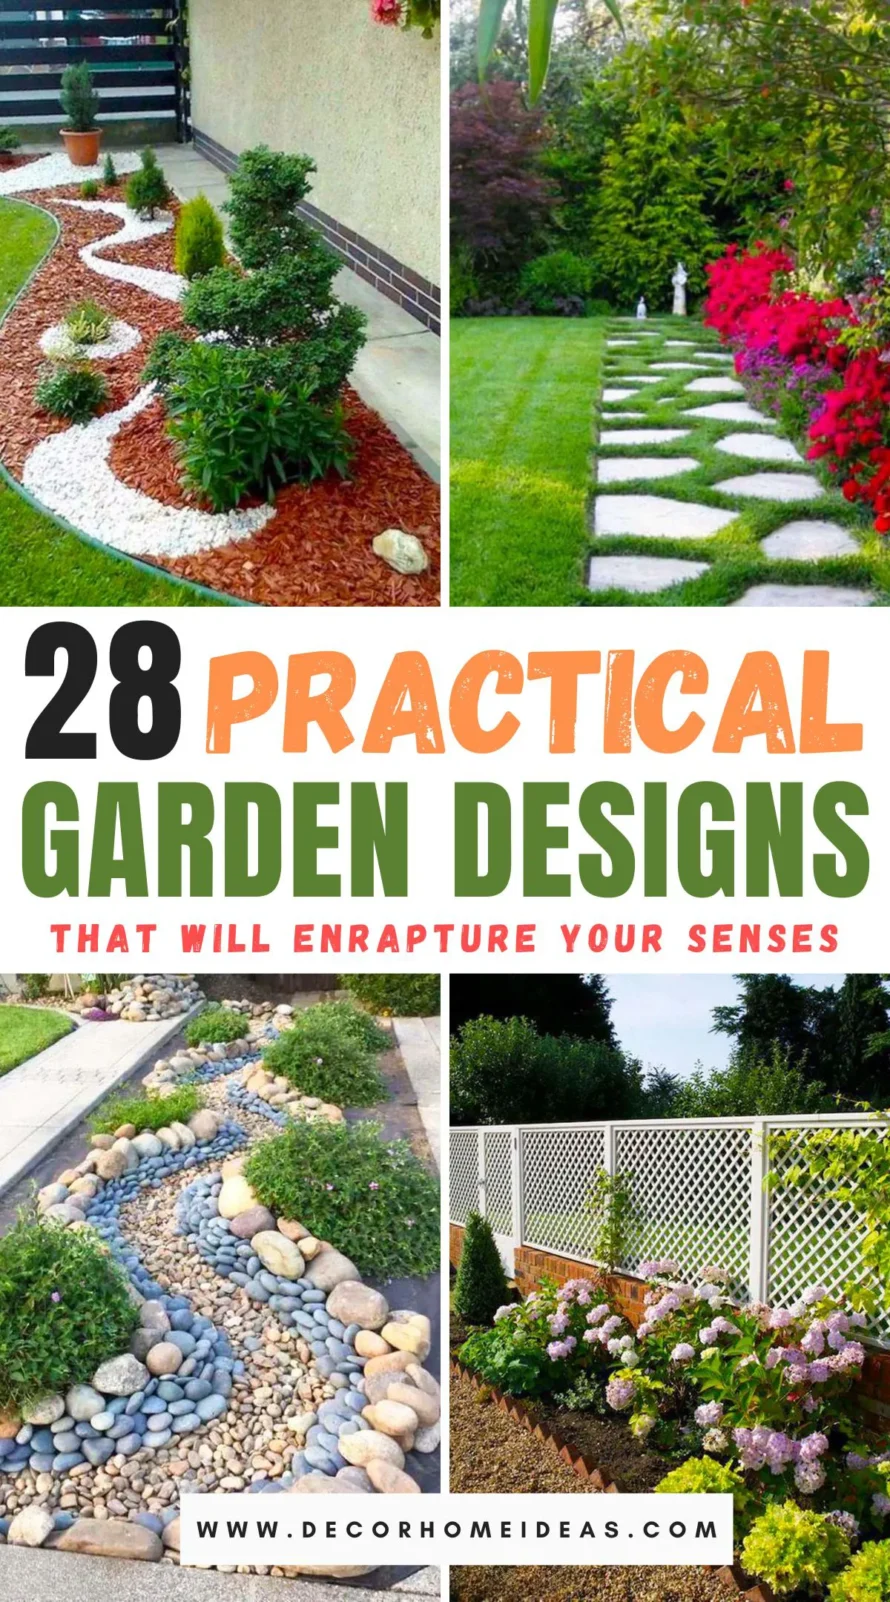 Explore 28 divine garden designs that promise to enchant your senses. From aromatic herb gardens to lush floral arrangements, each design combines beauty and tranquility to create a serene outdoor sanctuary. Dive in to discover your perfect garden paradise!